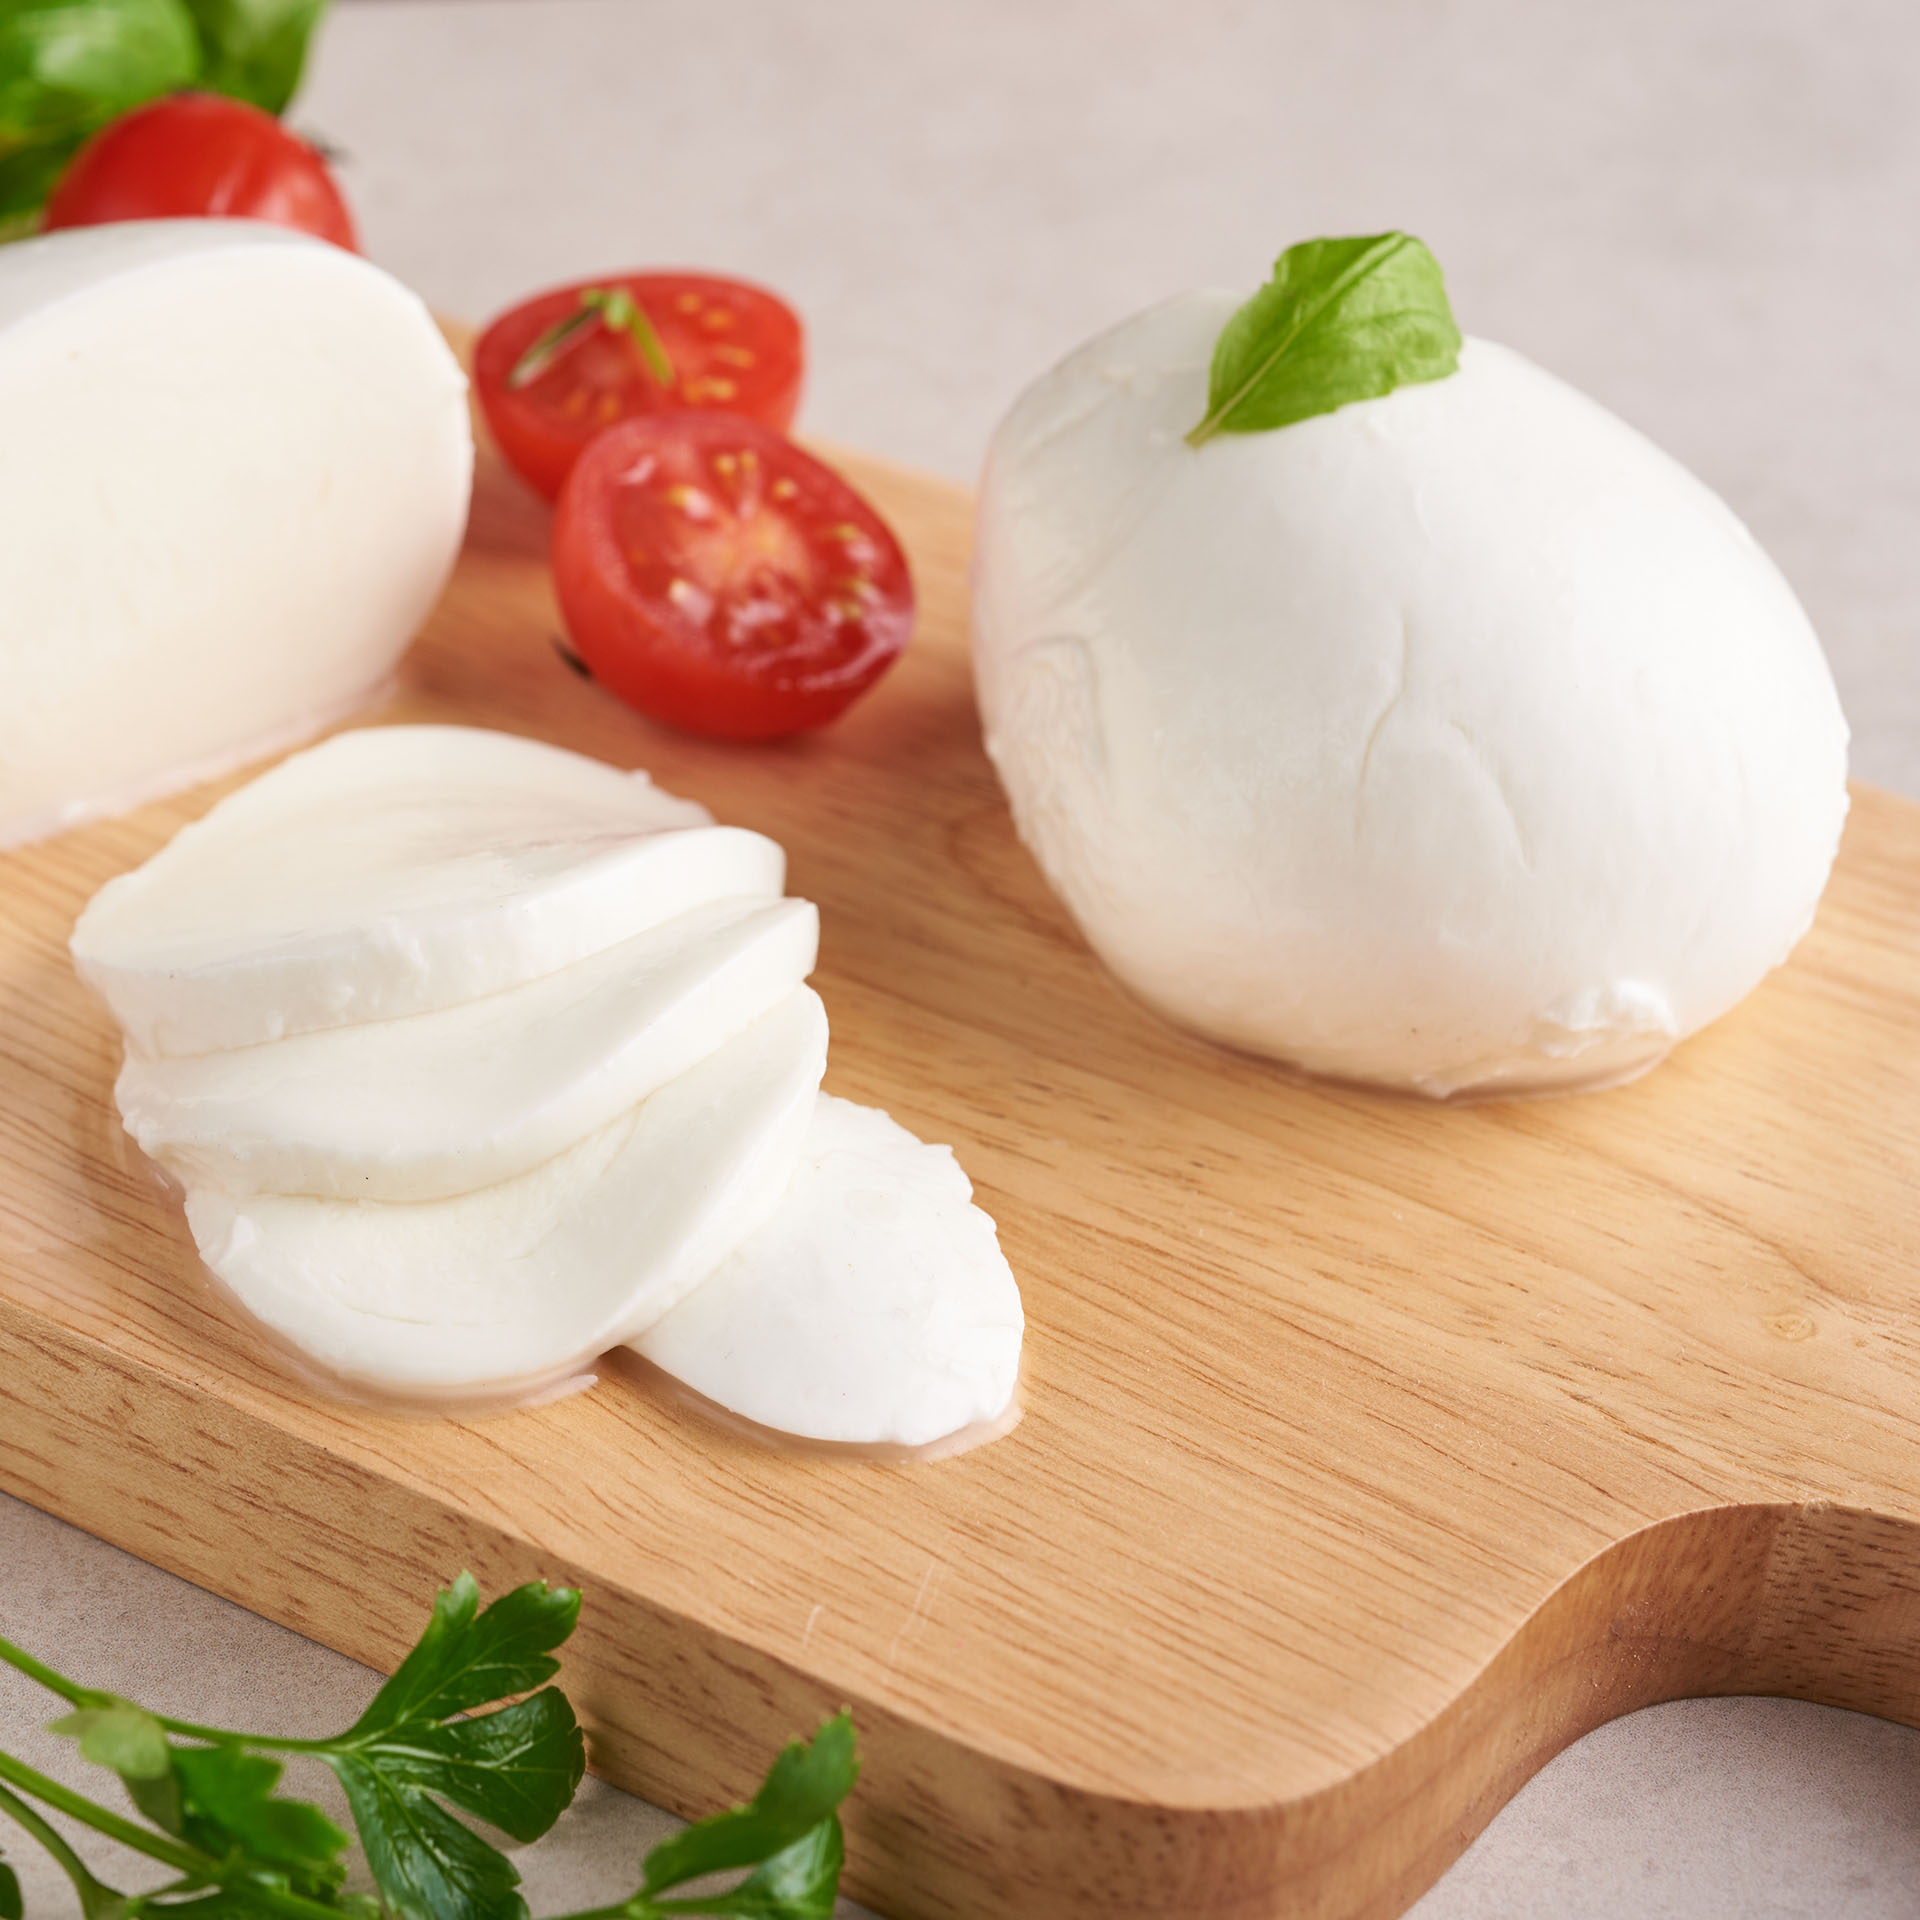 Fresh mozzarella cheese, Soft italian cheeses, tomato and basil, olives oil and rosemary on wooden serving board over light wooden background. Healthy food. Top view. Flat lay.